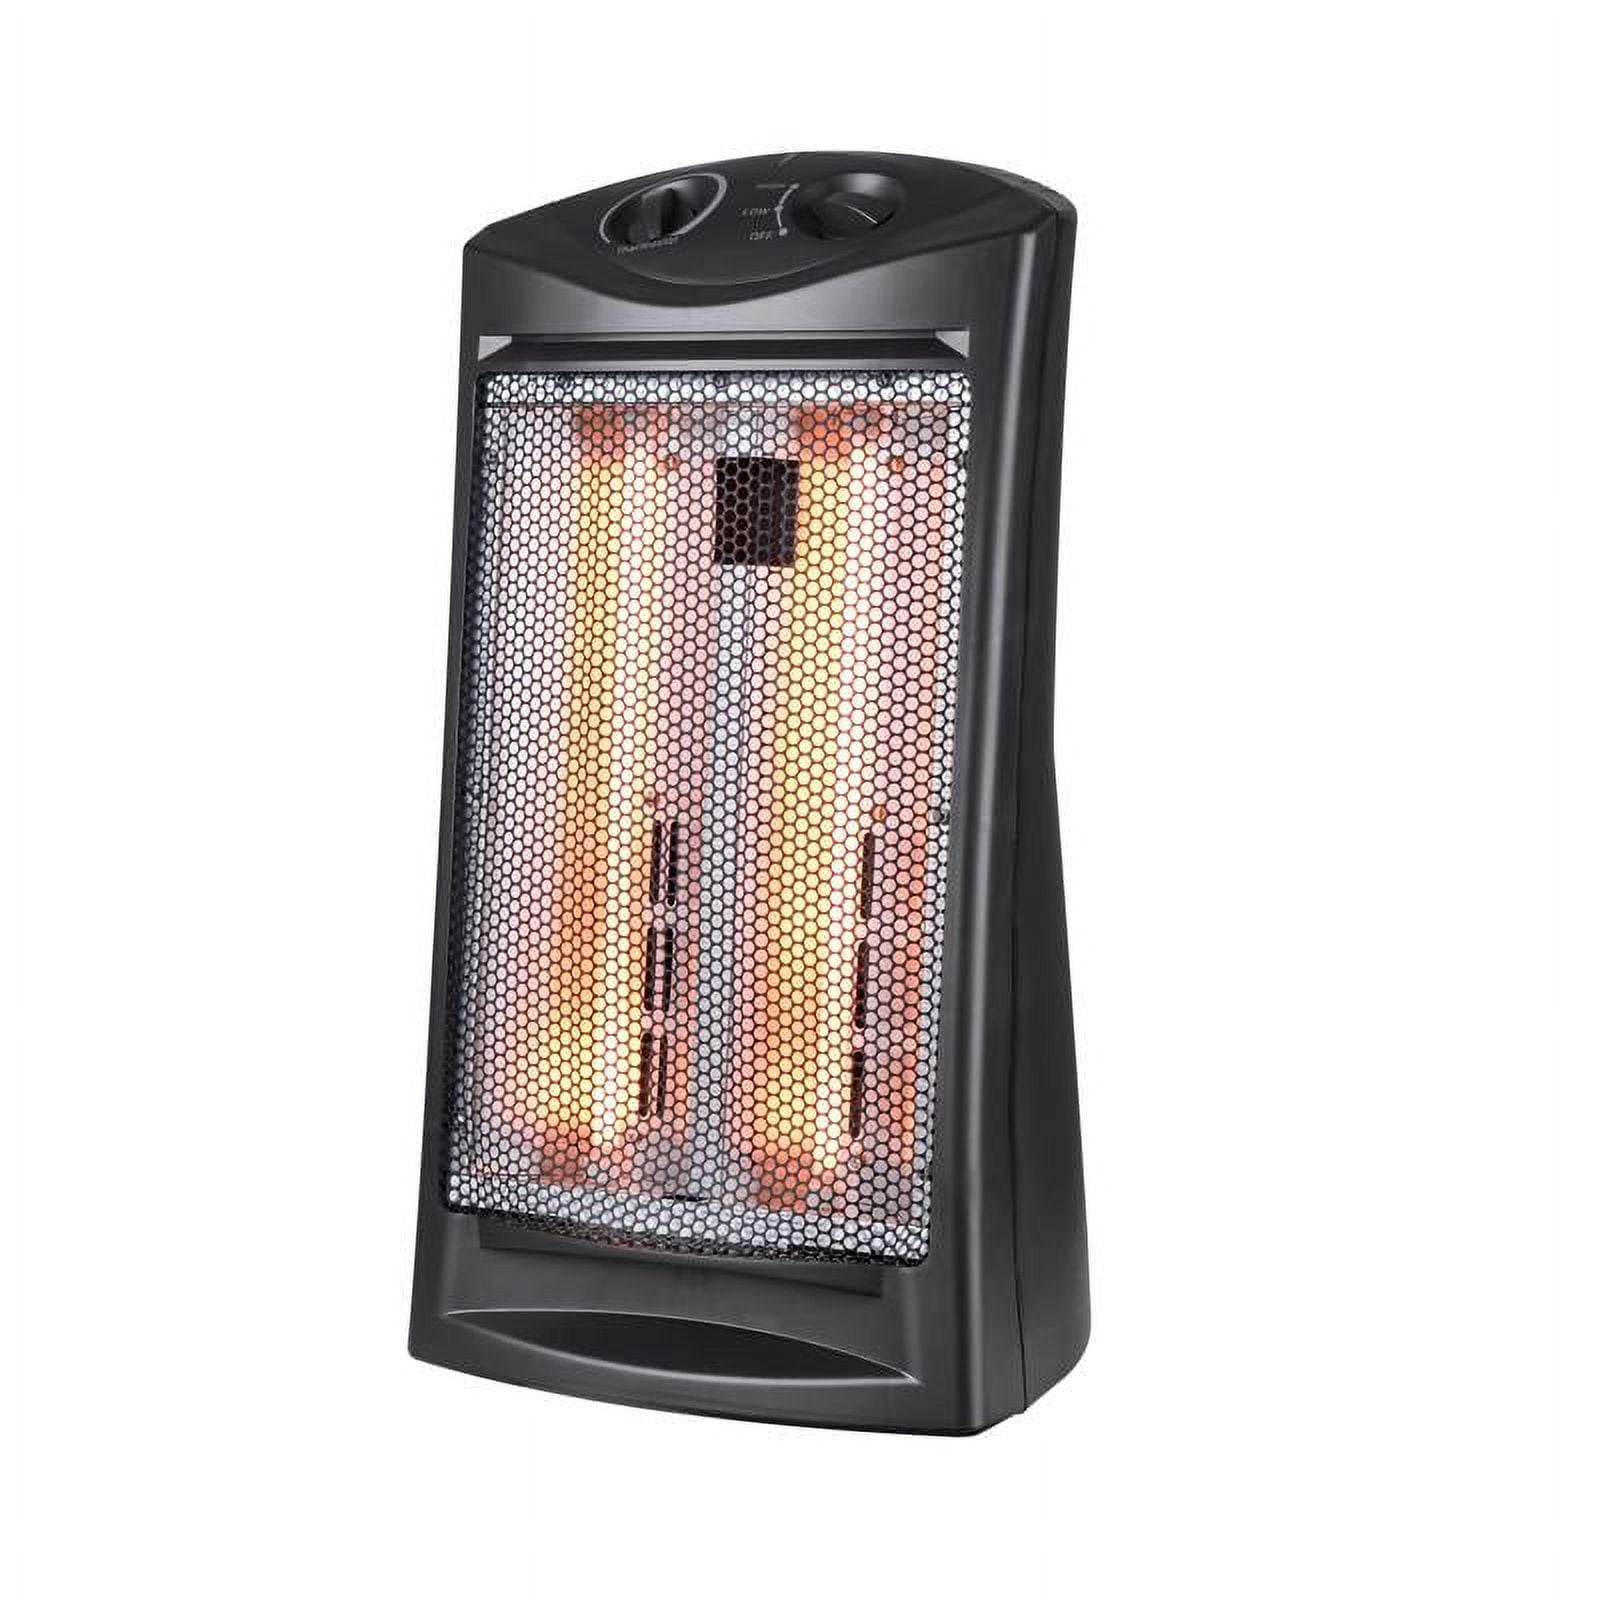 Picture of Perfect Aire 4010543 24.25 x 14.5 x 10.25 in. Electric Tower Heater, Black